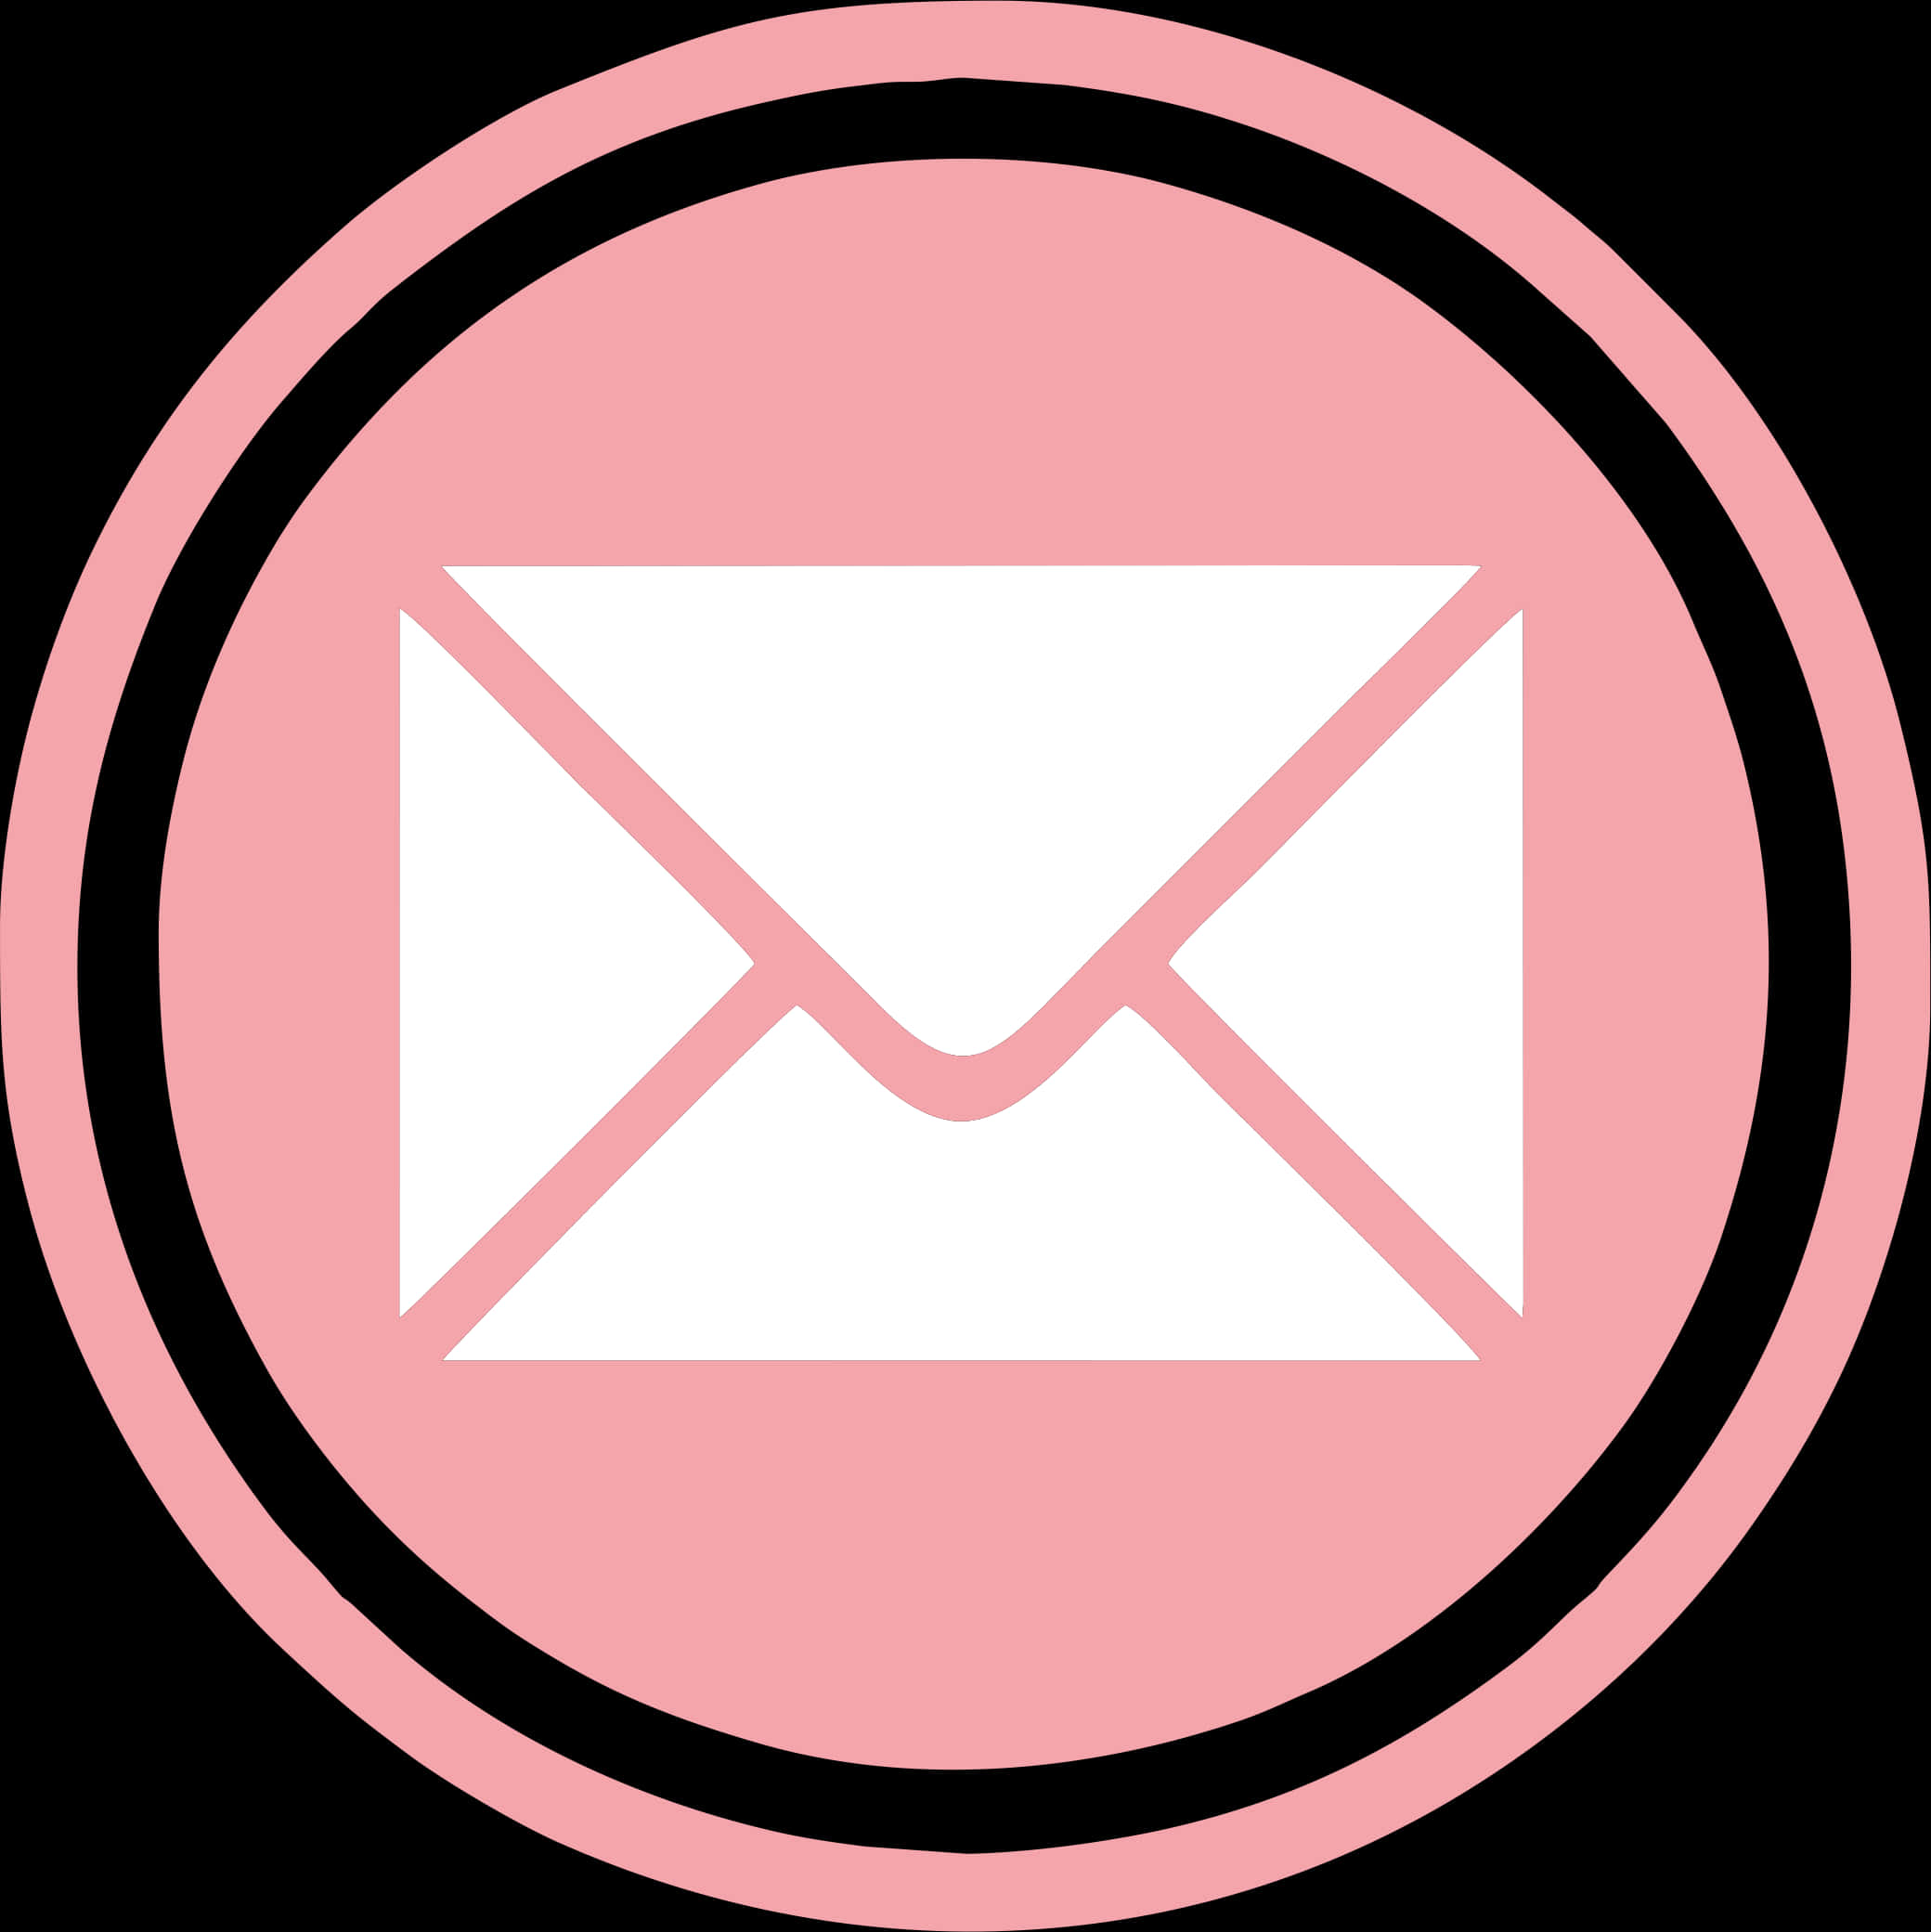 A Pink And Black Circle With A White Envelope